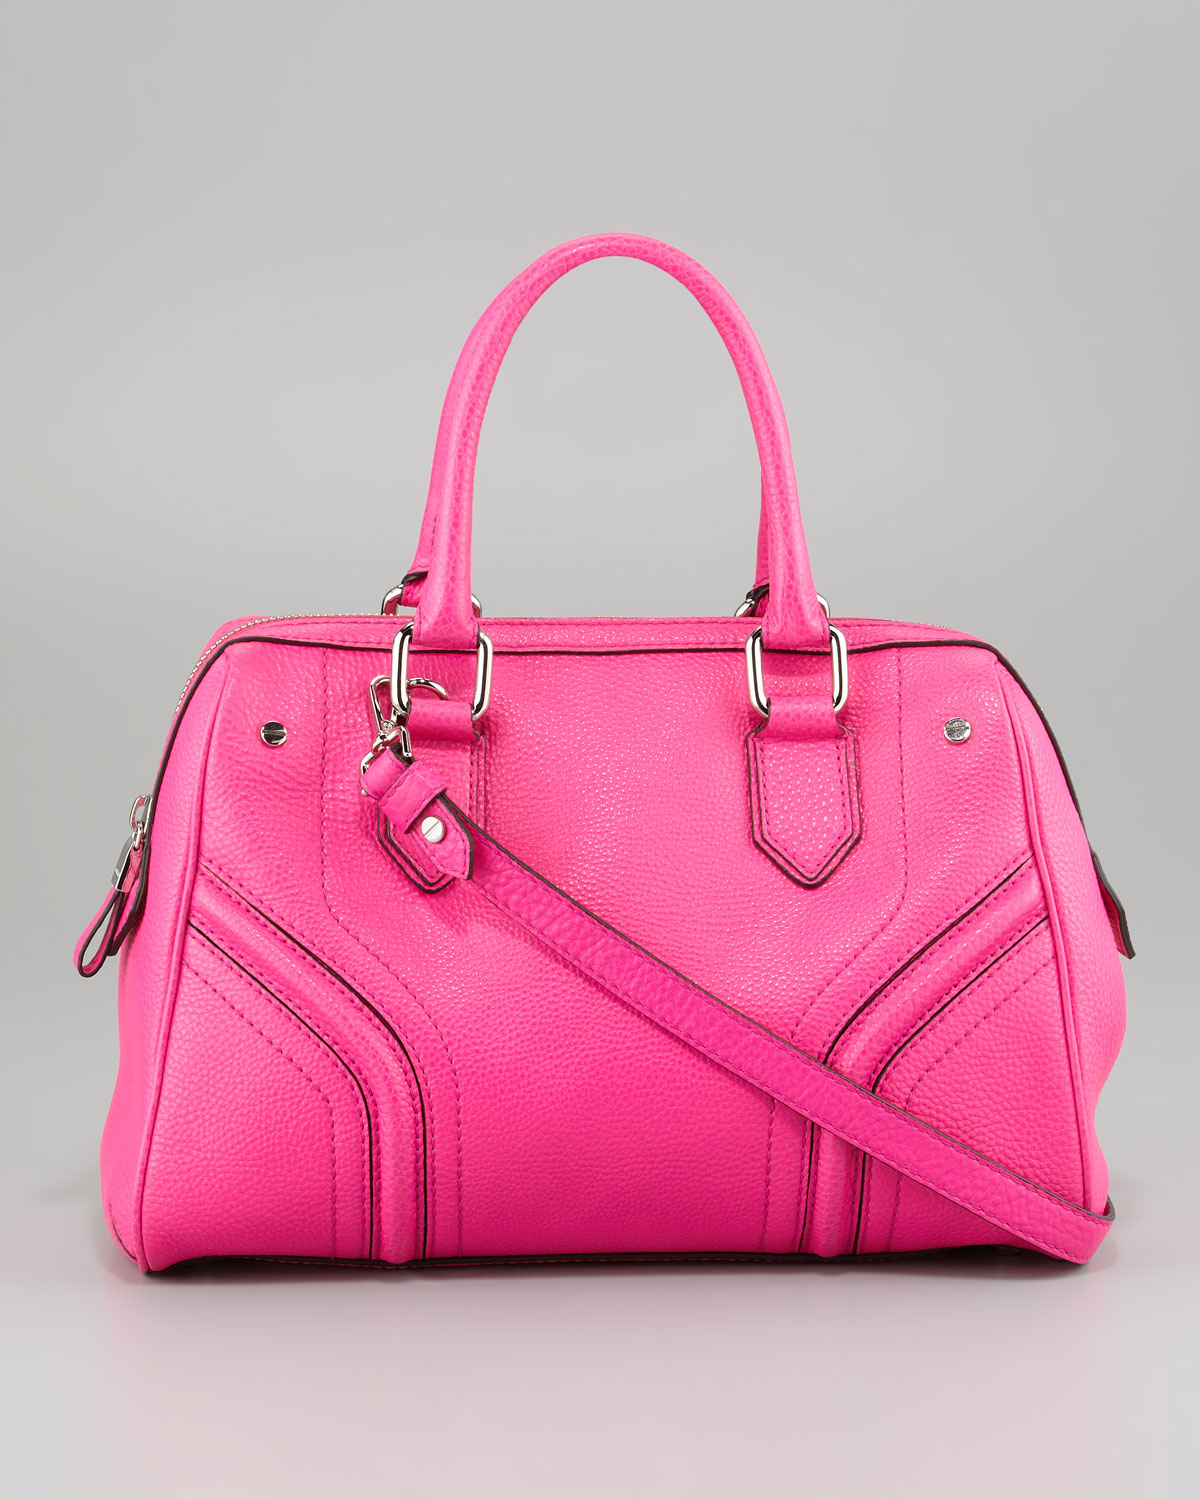 MILLY Zoey Pebbled Leather Satchel Bag in Hot Pink (Pink) - Lyst